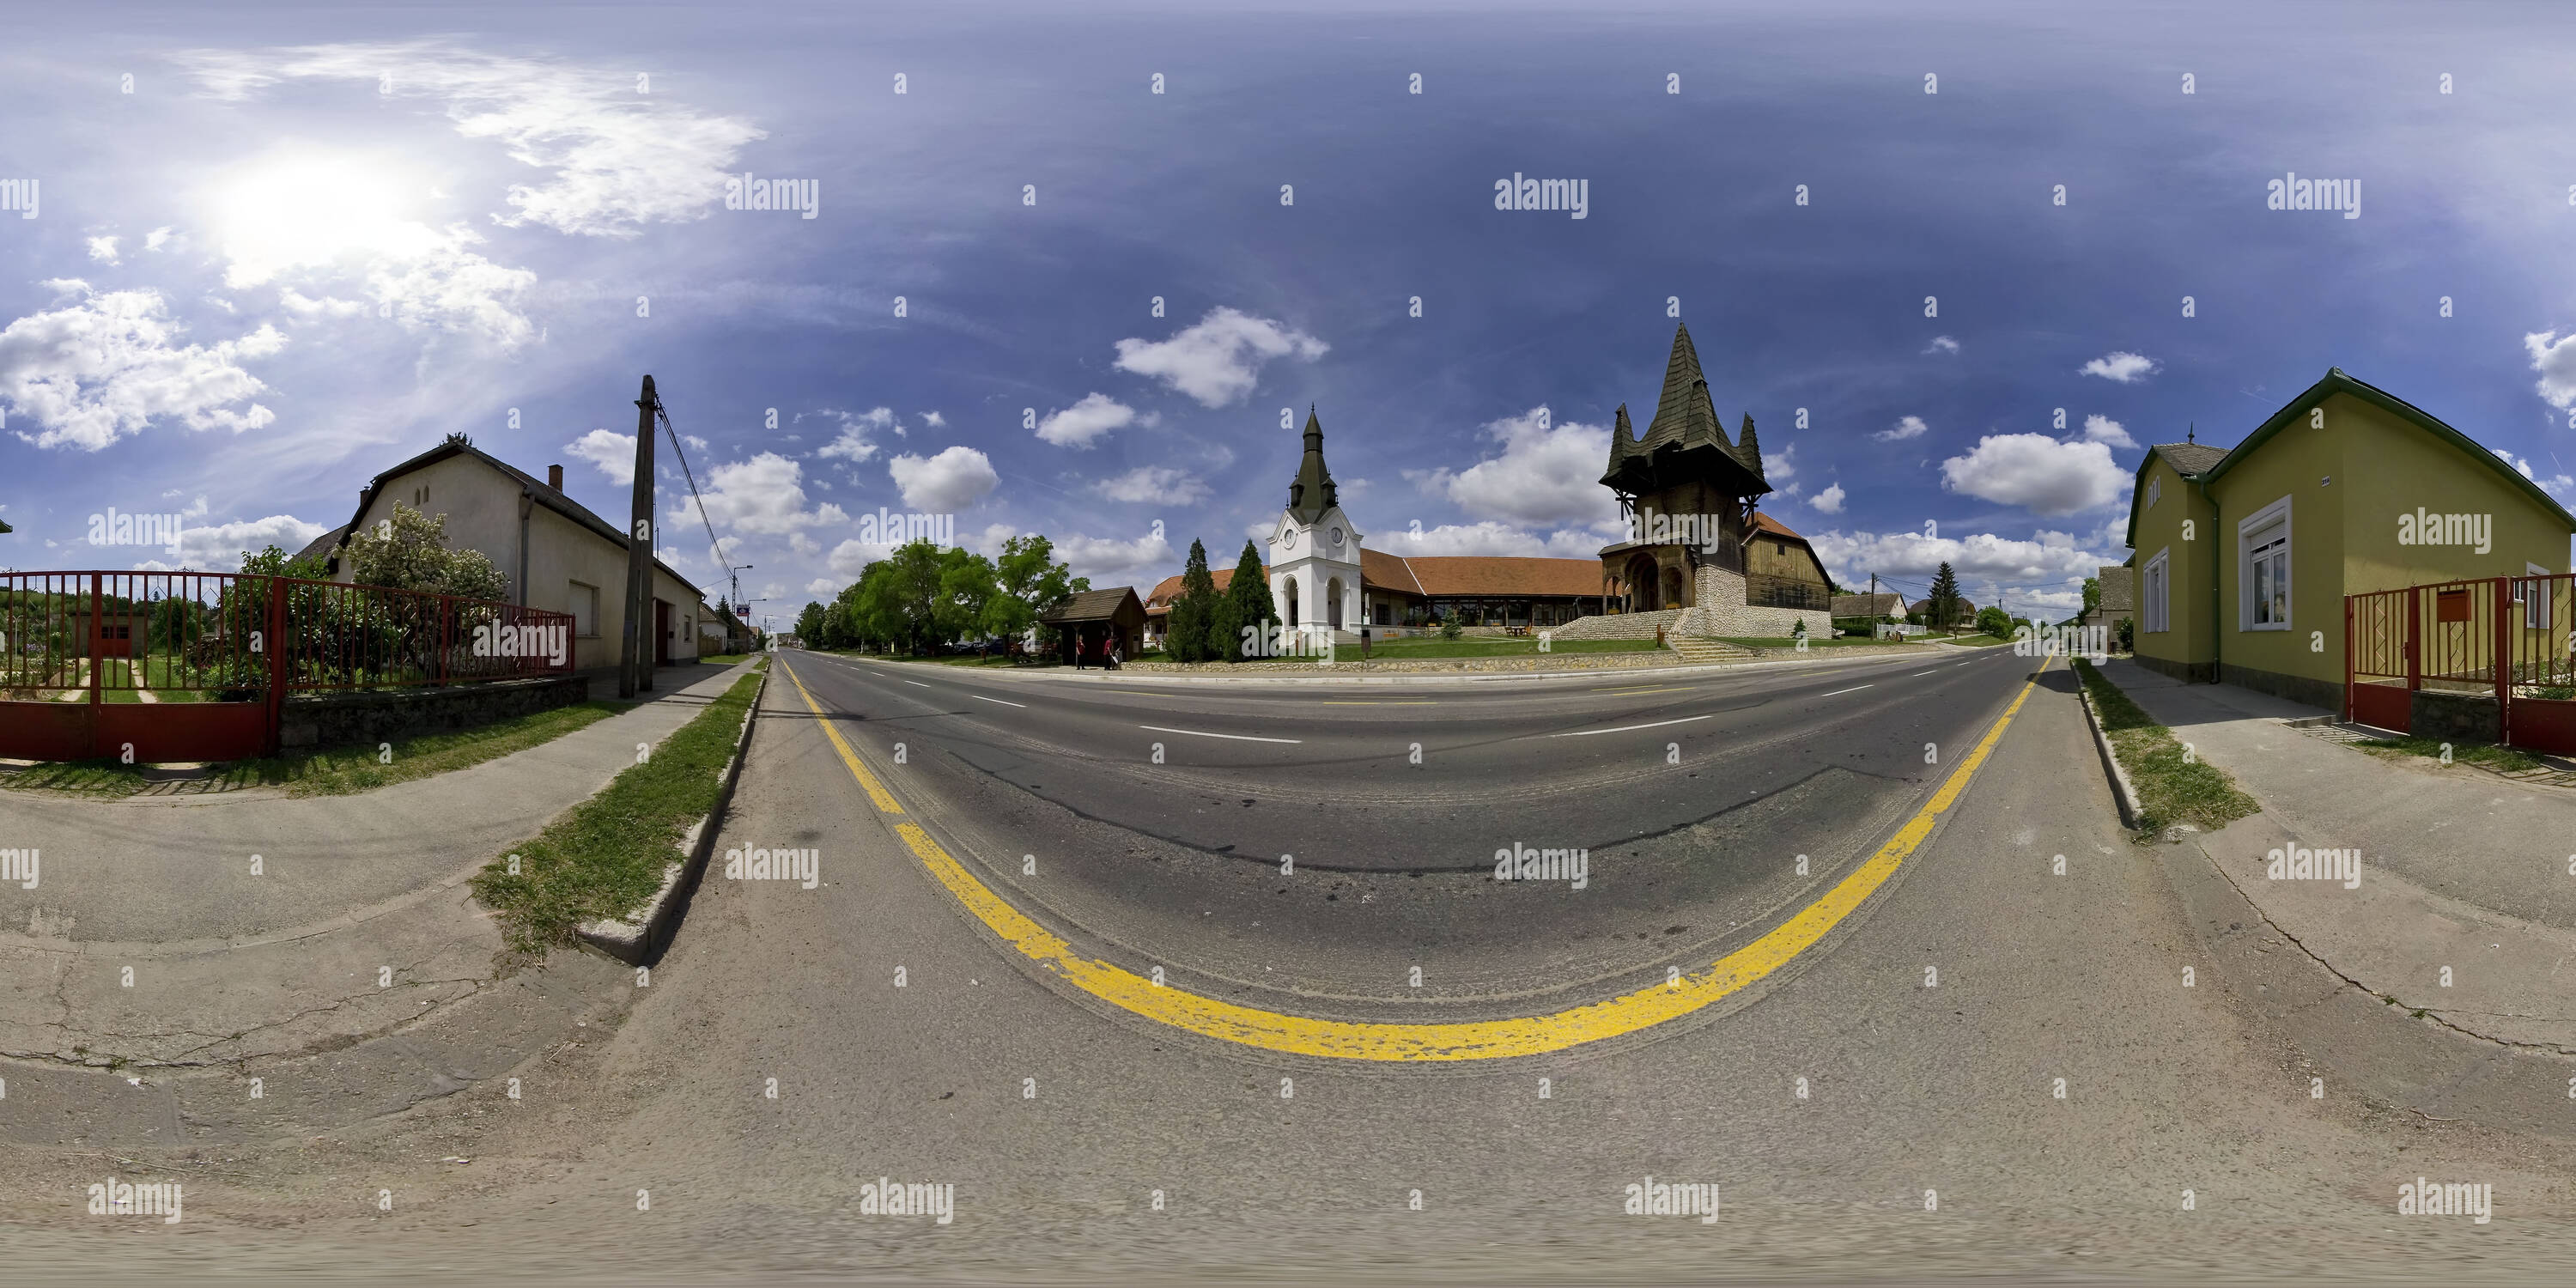 360 degree panoramic view of Community centre - planning Imre Makovecz